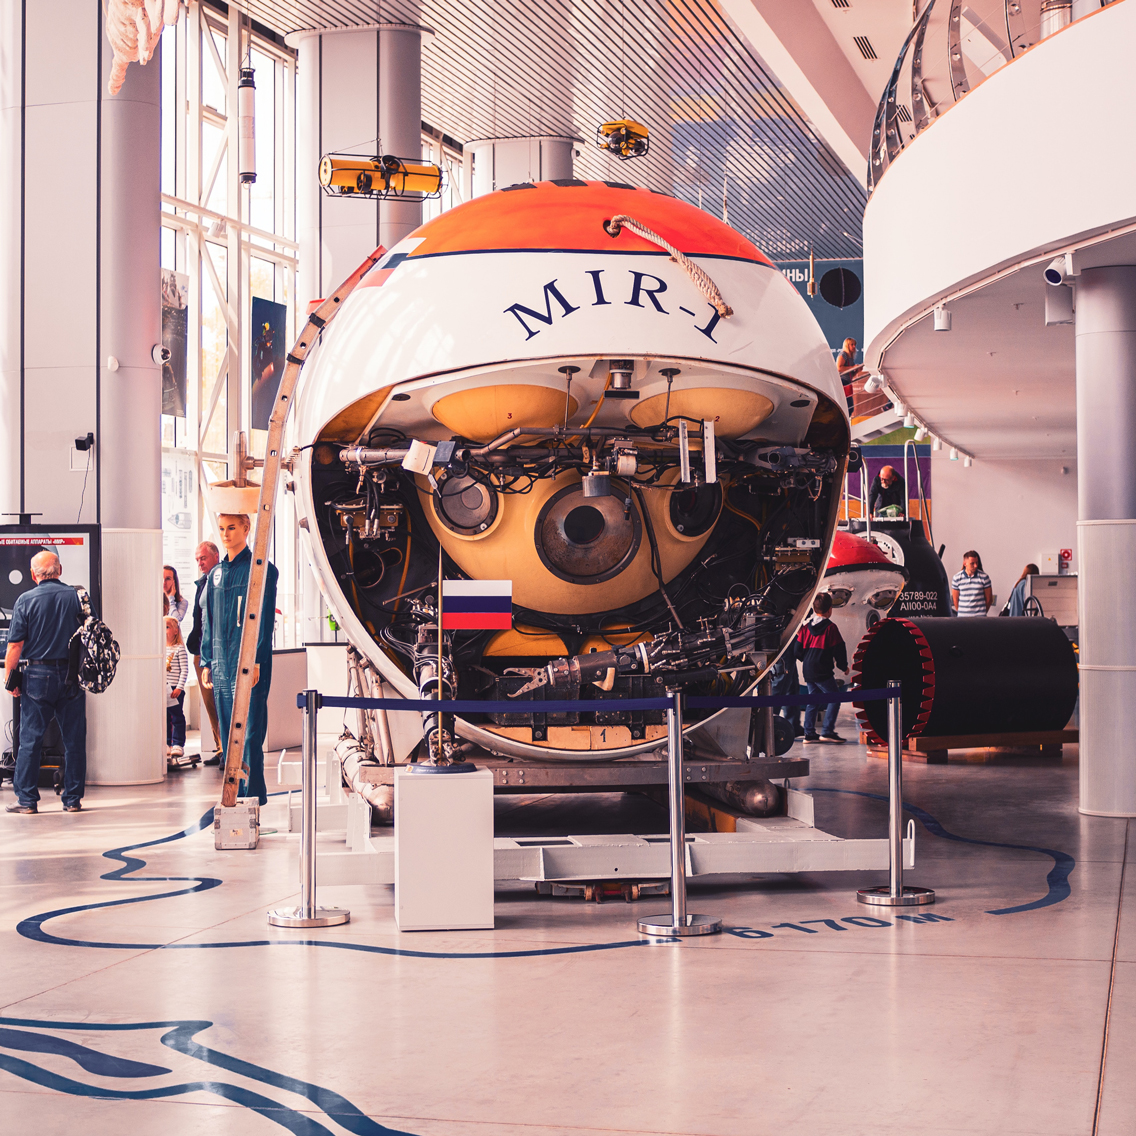 MIR-1 submersible in a museum